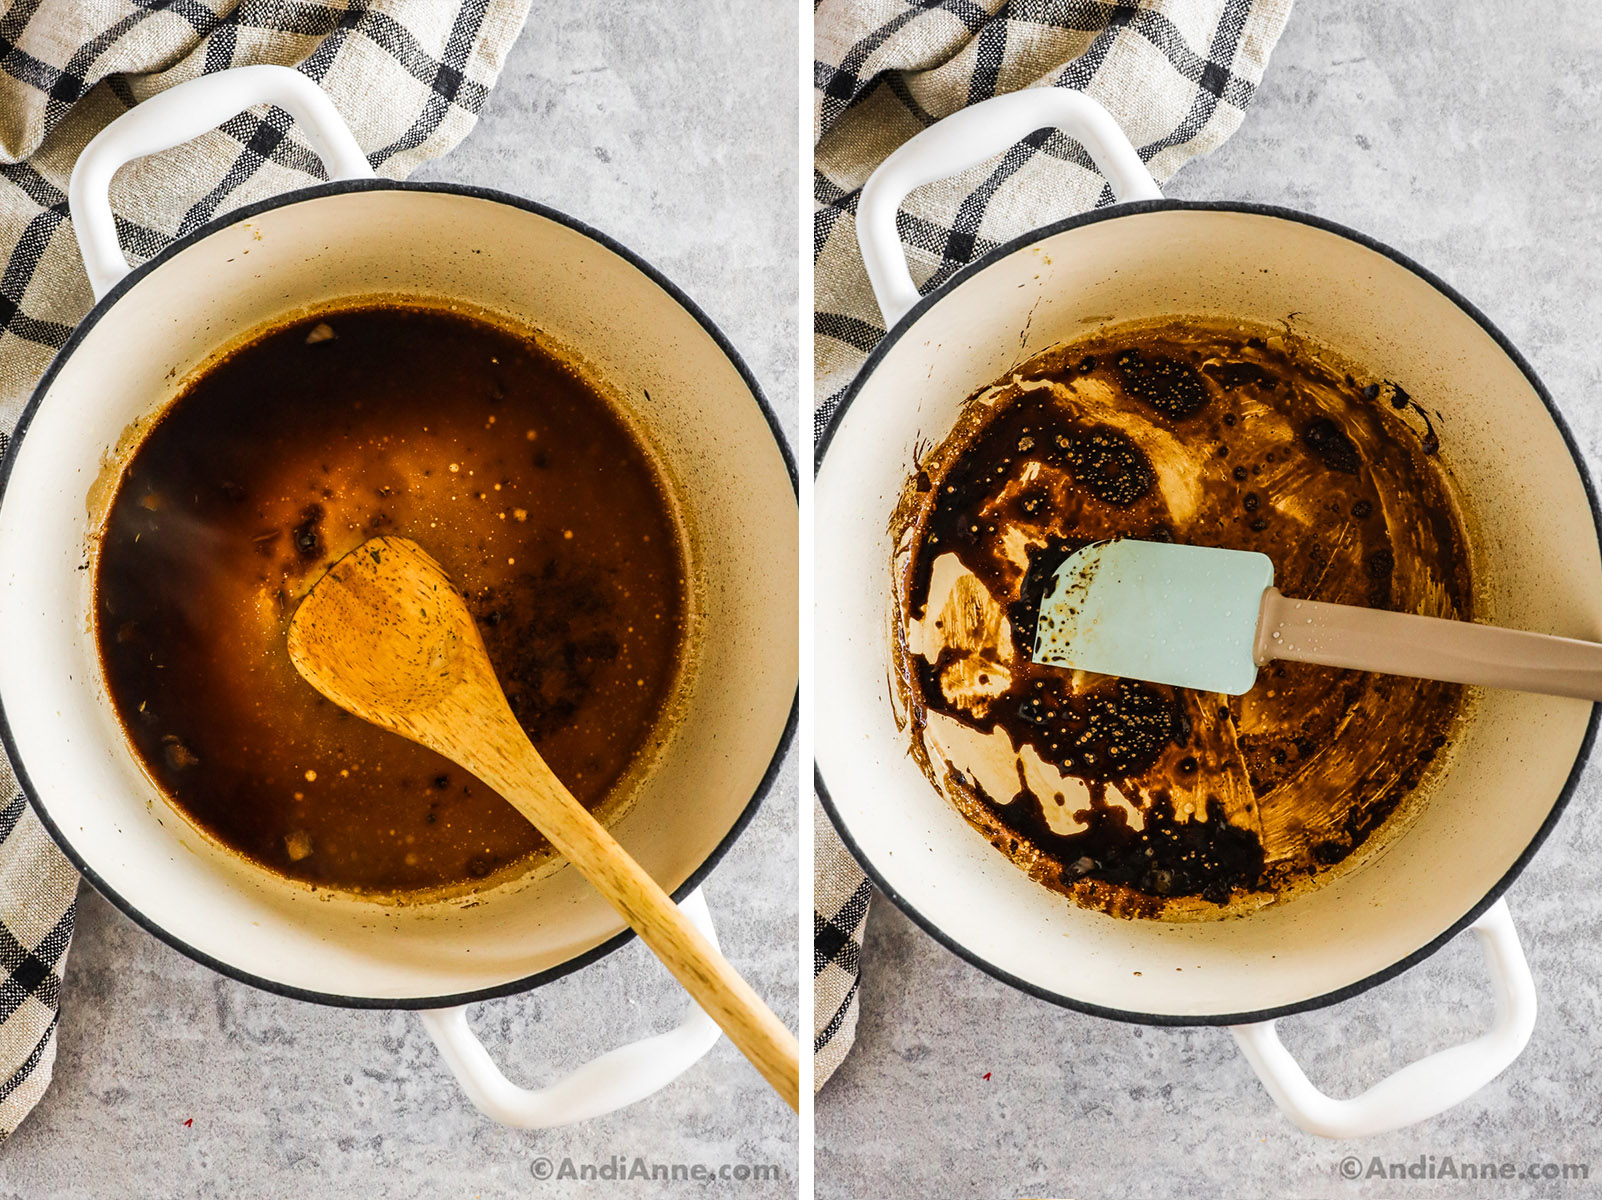 Two images of a white pot, both with balsamic vinegar, second image is reduced.